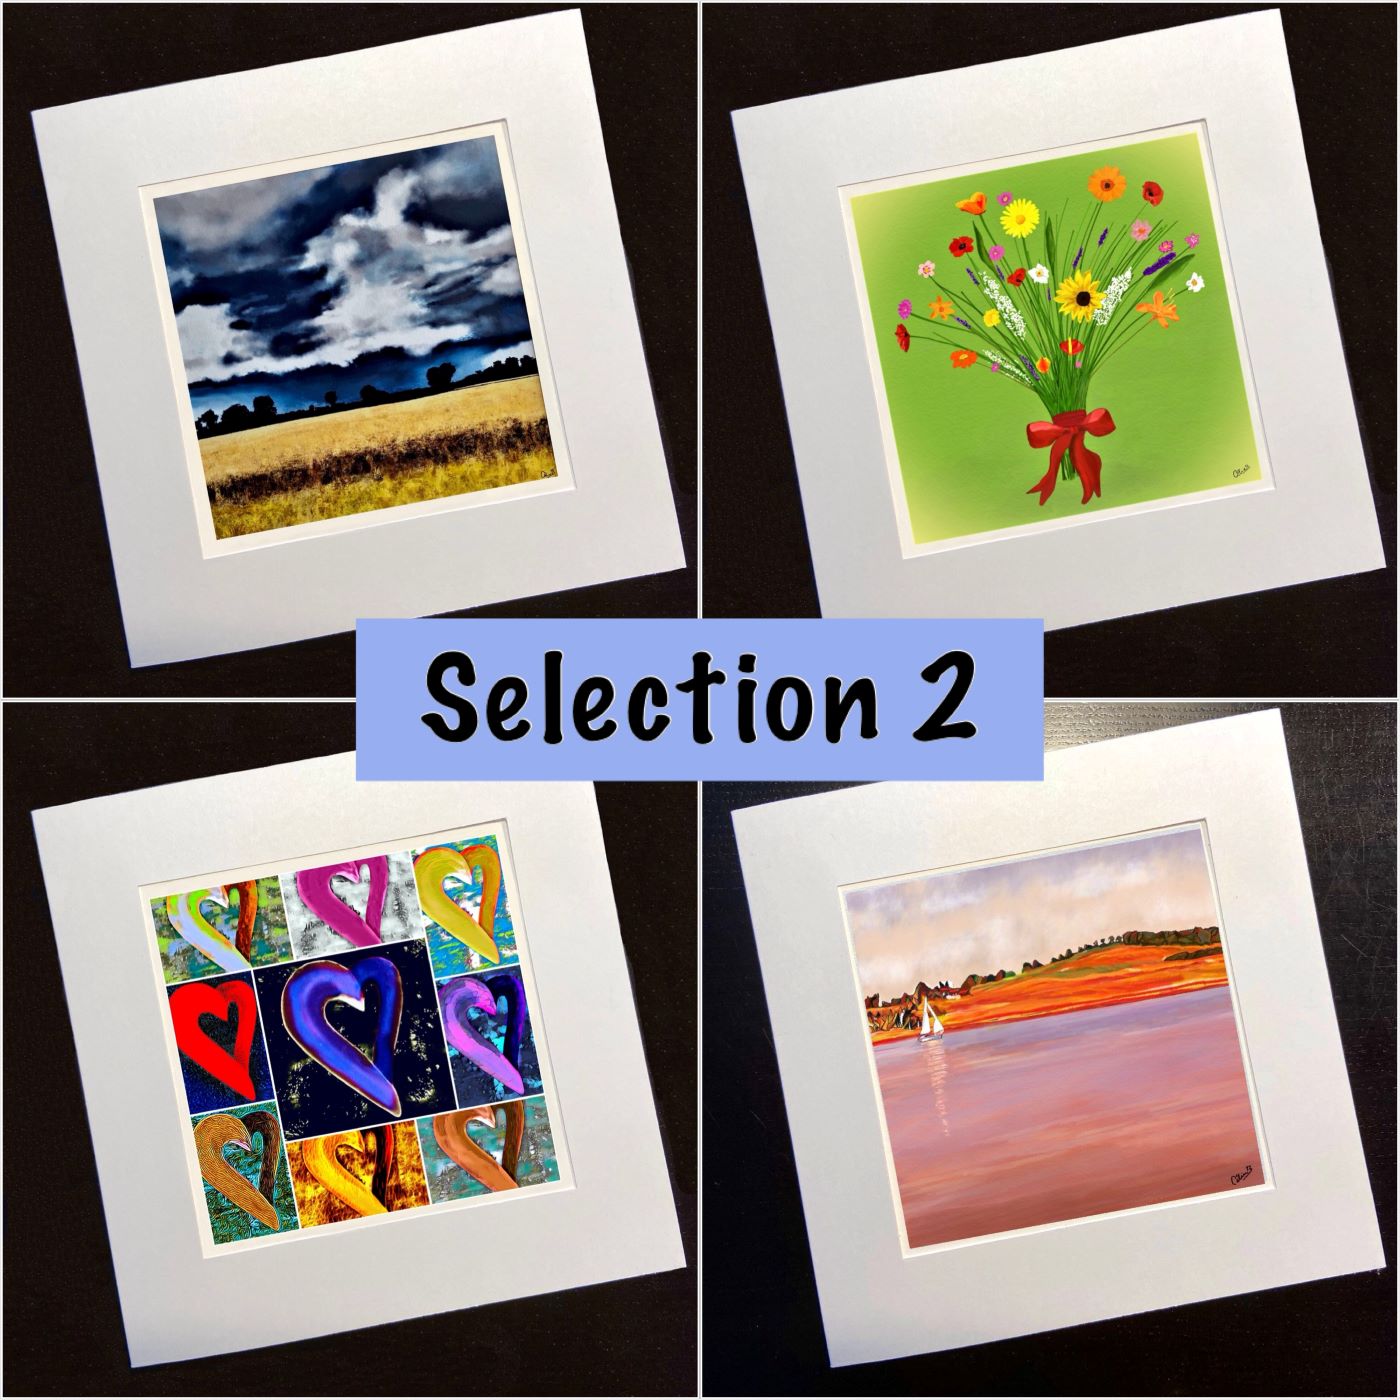 Card selection packs GROWNUPS: 4 cards for £10 - Free P&P 8 cards +